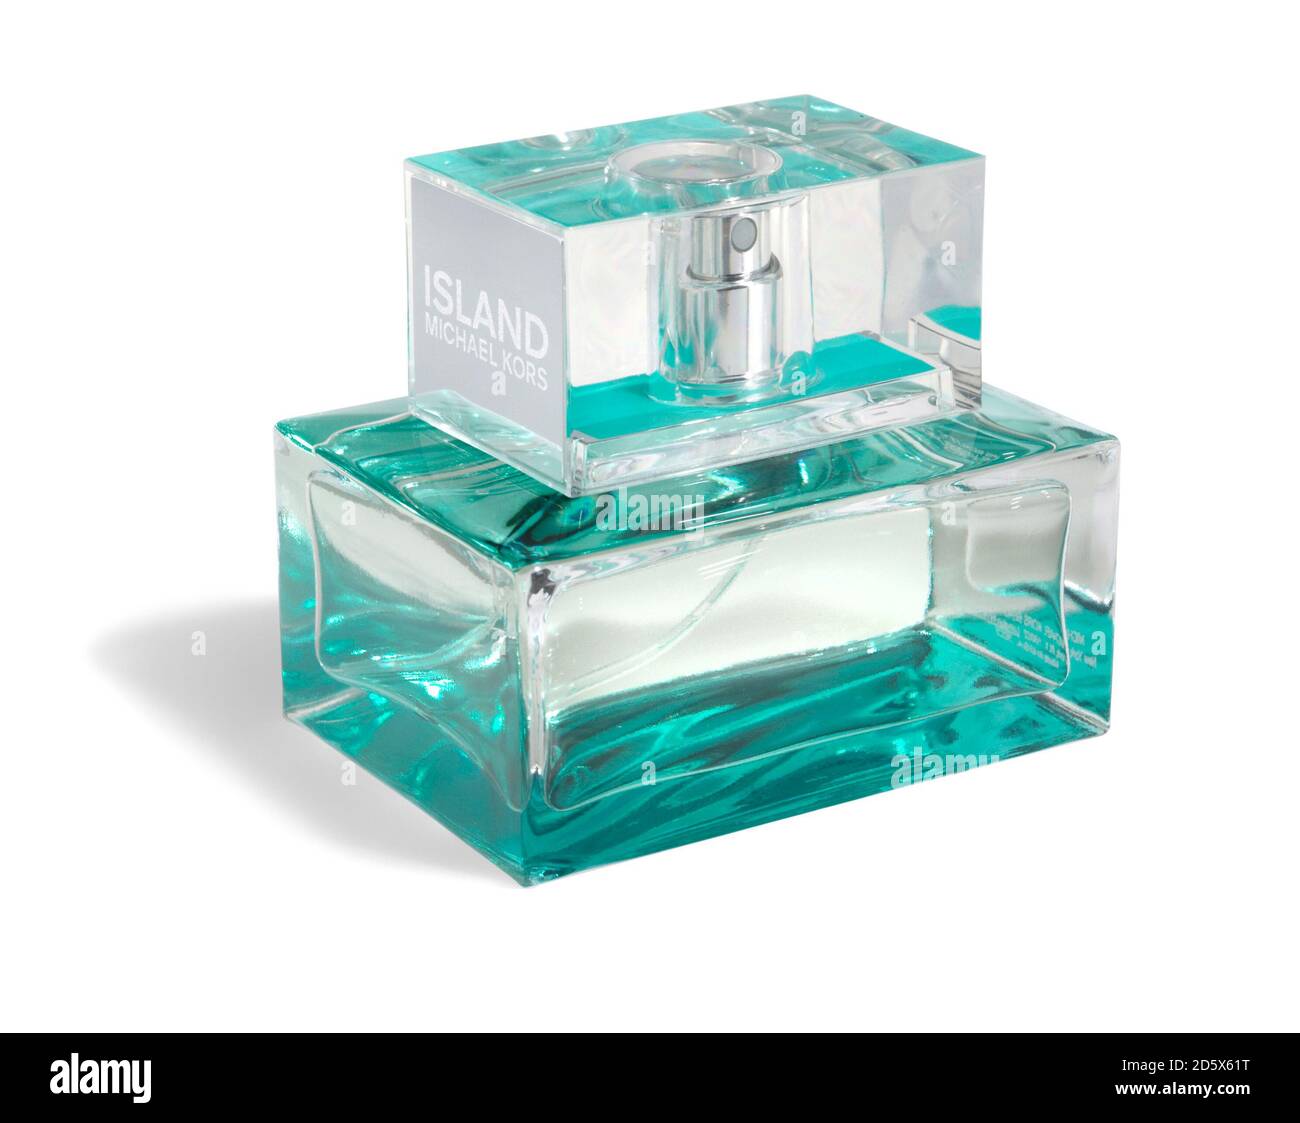 Blue tinted bottle of Michael Kors Island perfume photographed on a white  background Stock Photo - Alamy